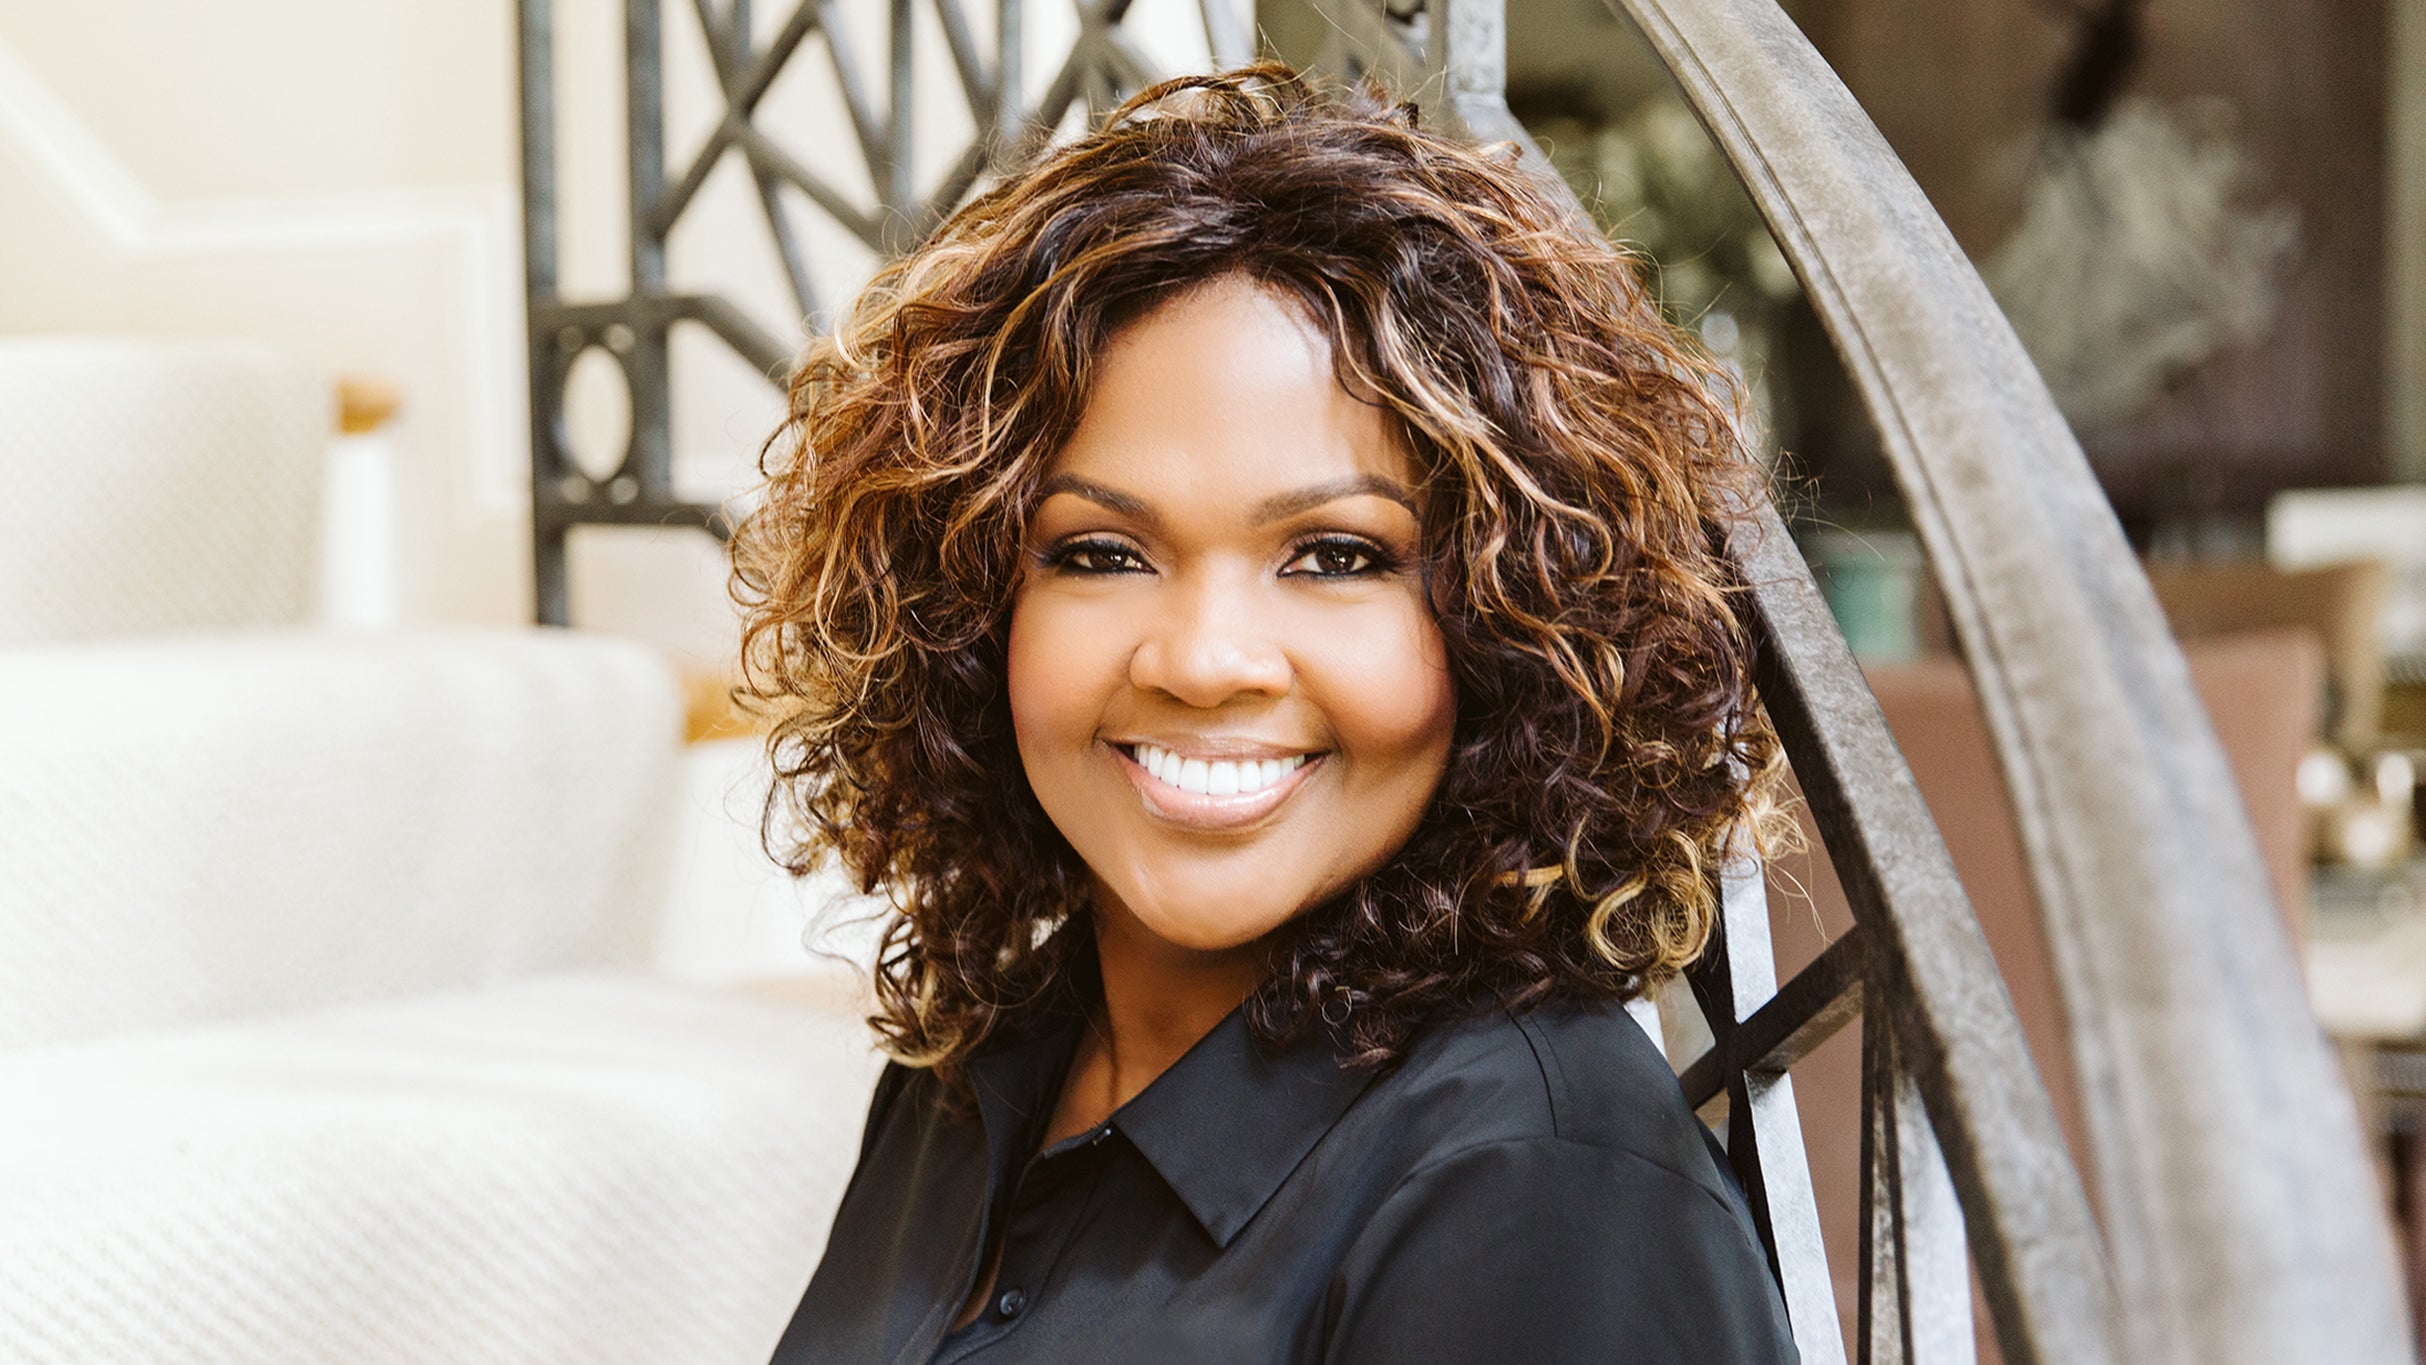 Cece Winans - The Goodness Tour in Shreveport promo photo for $10 off any ticket presale offer code